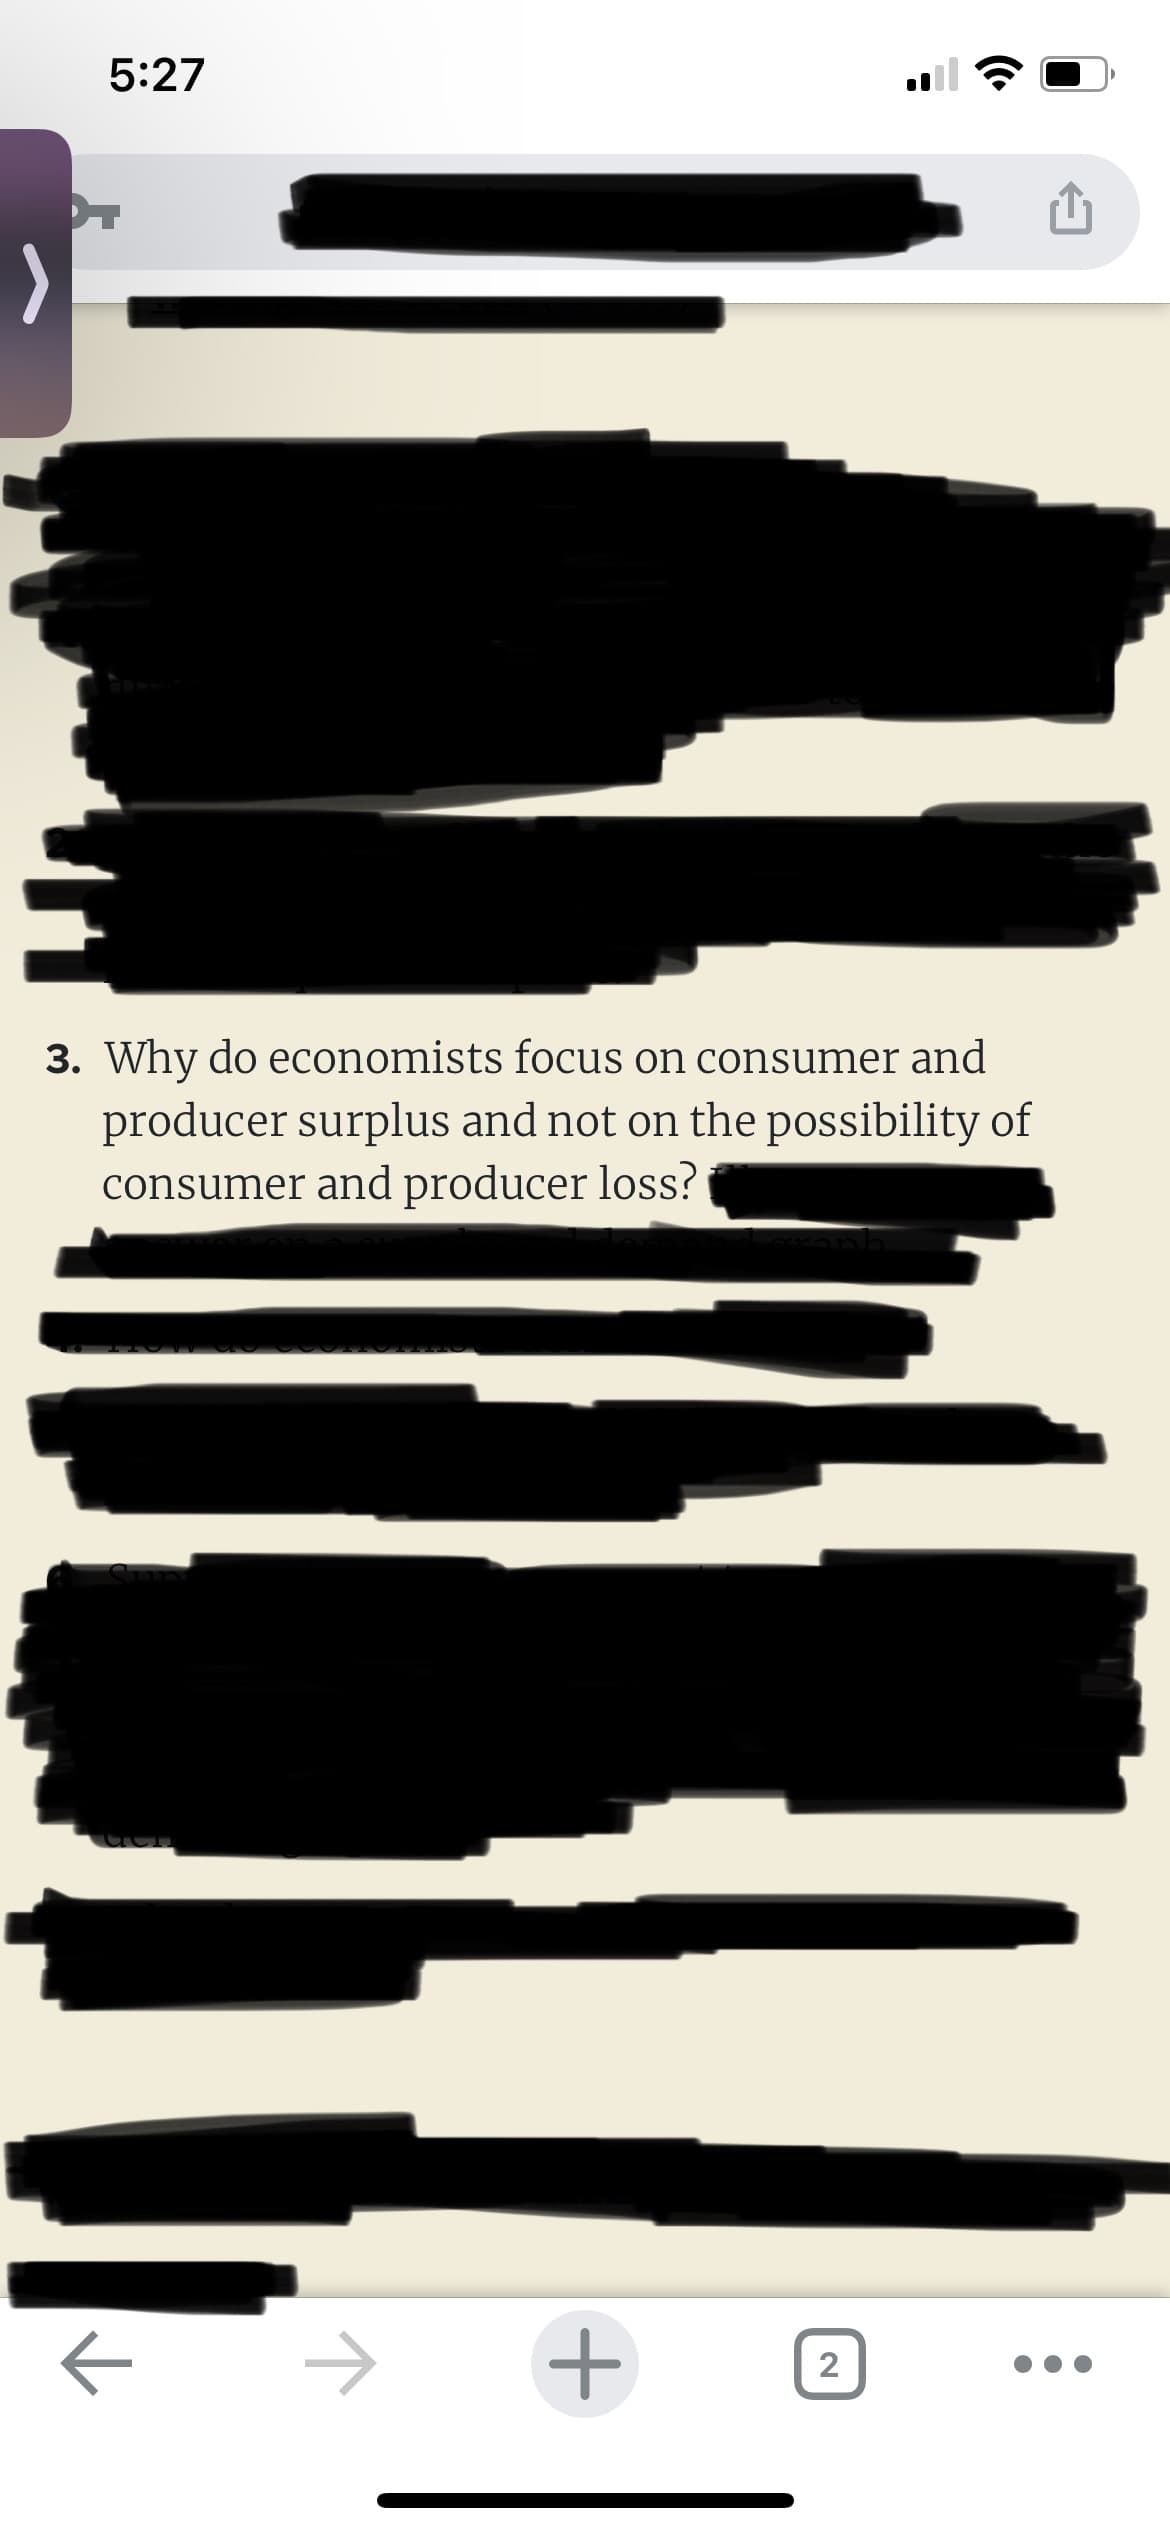 5:27
3. Why do economists focus on consumer and
producer surplus and not on the possibility of
consumer and producer loss?
✓
+
2